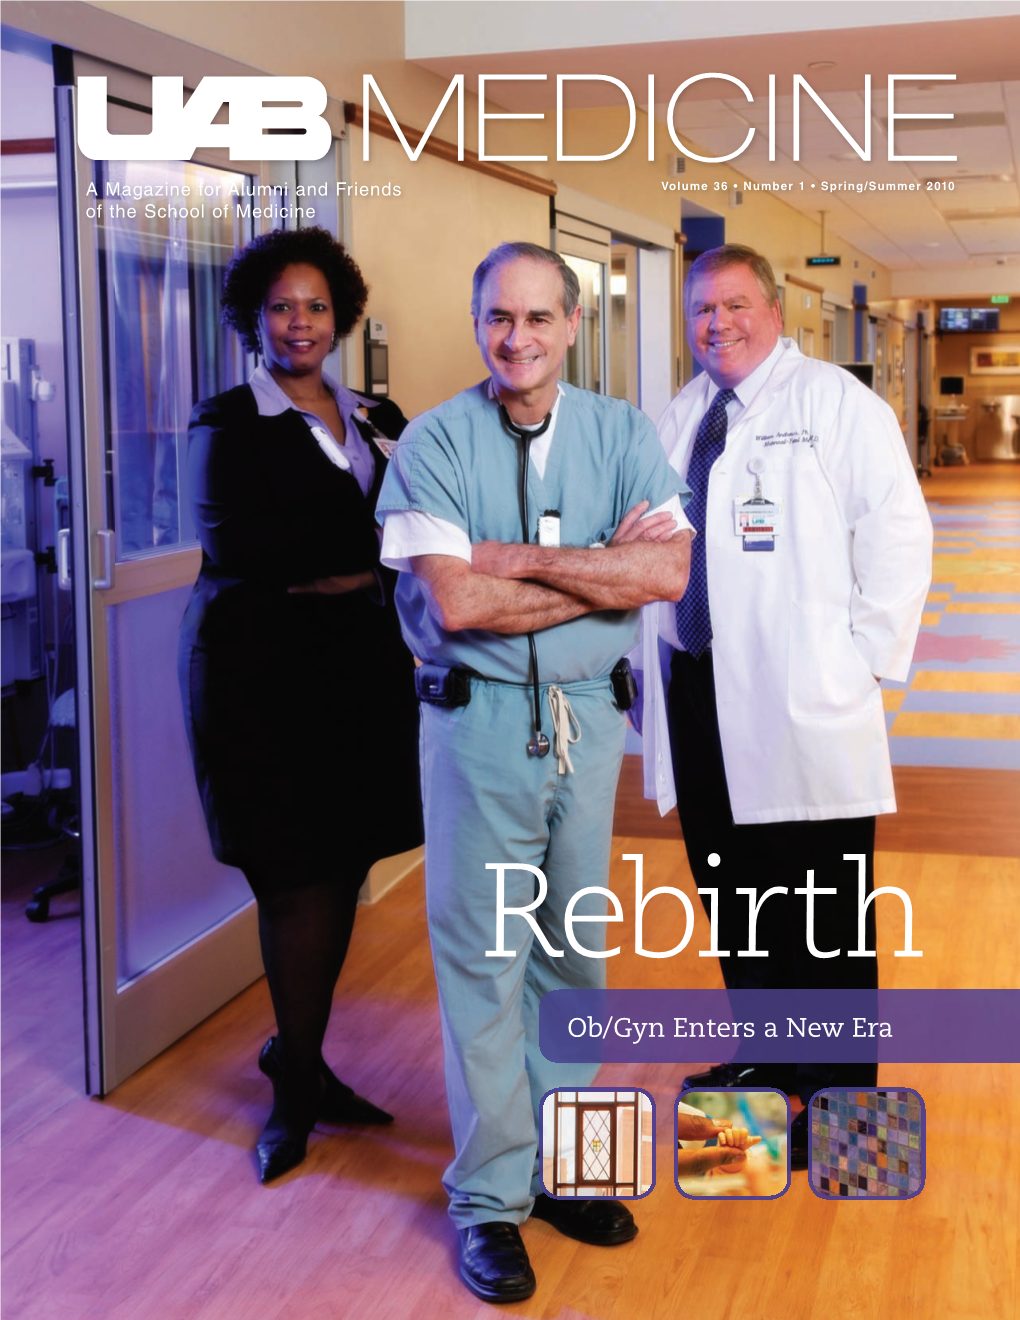 Ob/Gyn Enters a New Era a Magazine for Alumni and Friends of the School of Medicine Volume 36 • Number 1 • Spring/Summer 2010